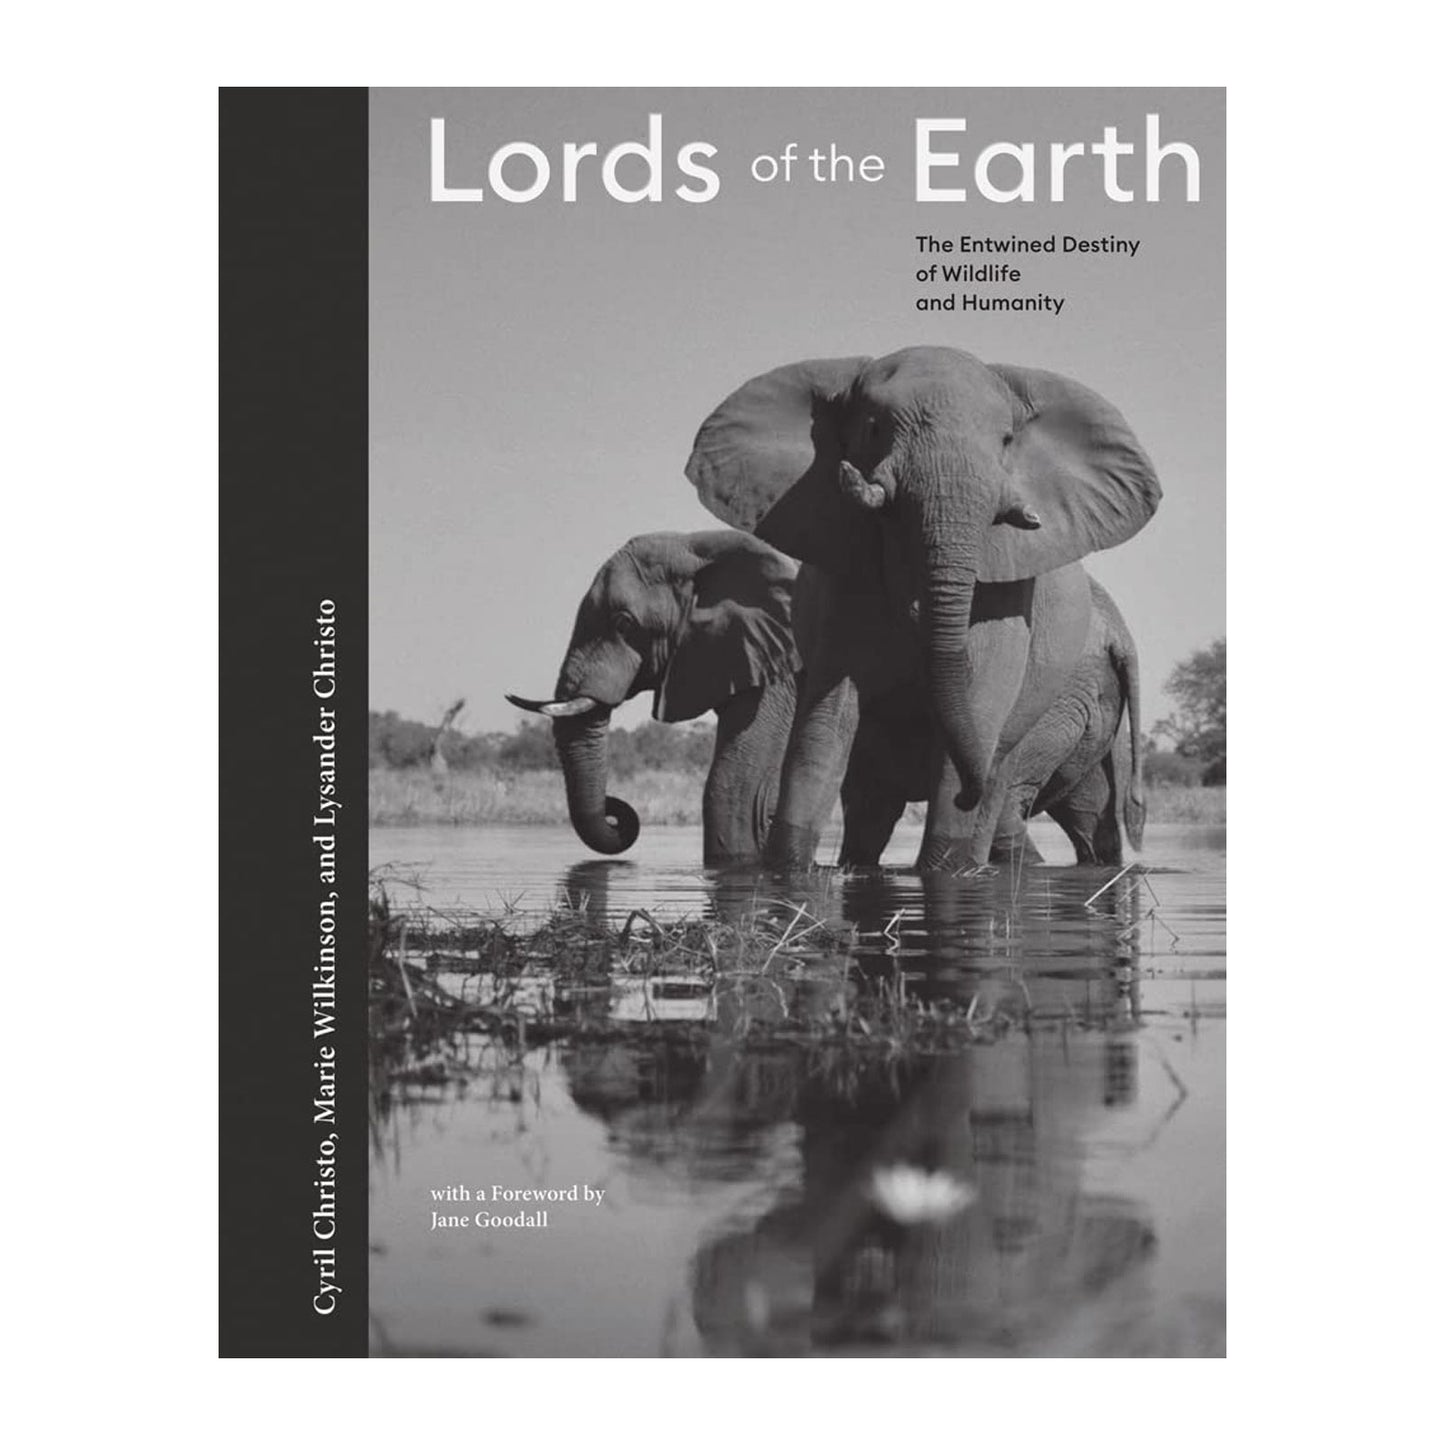 Lords of the Earth: The Entwined Destiny of Wildlife and Humanity